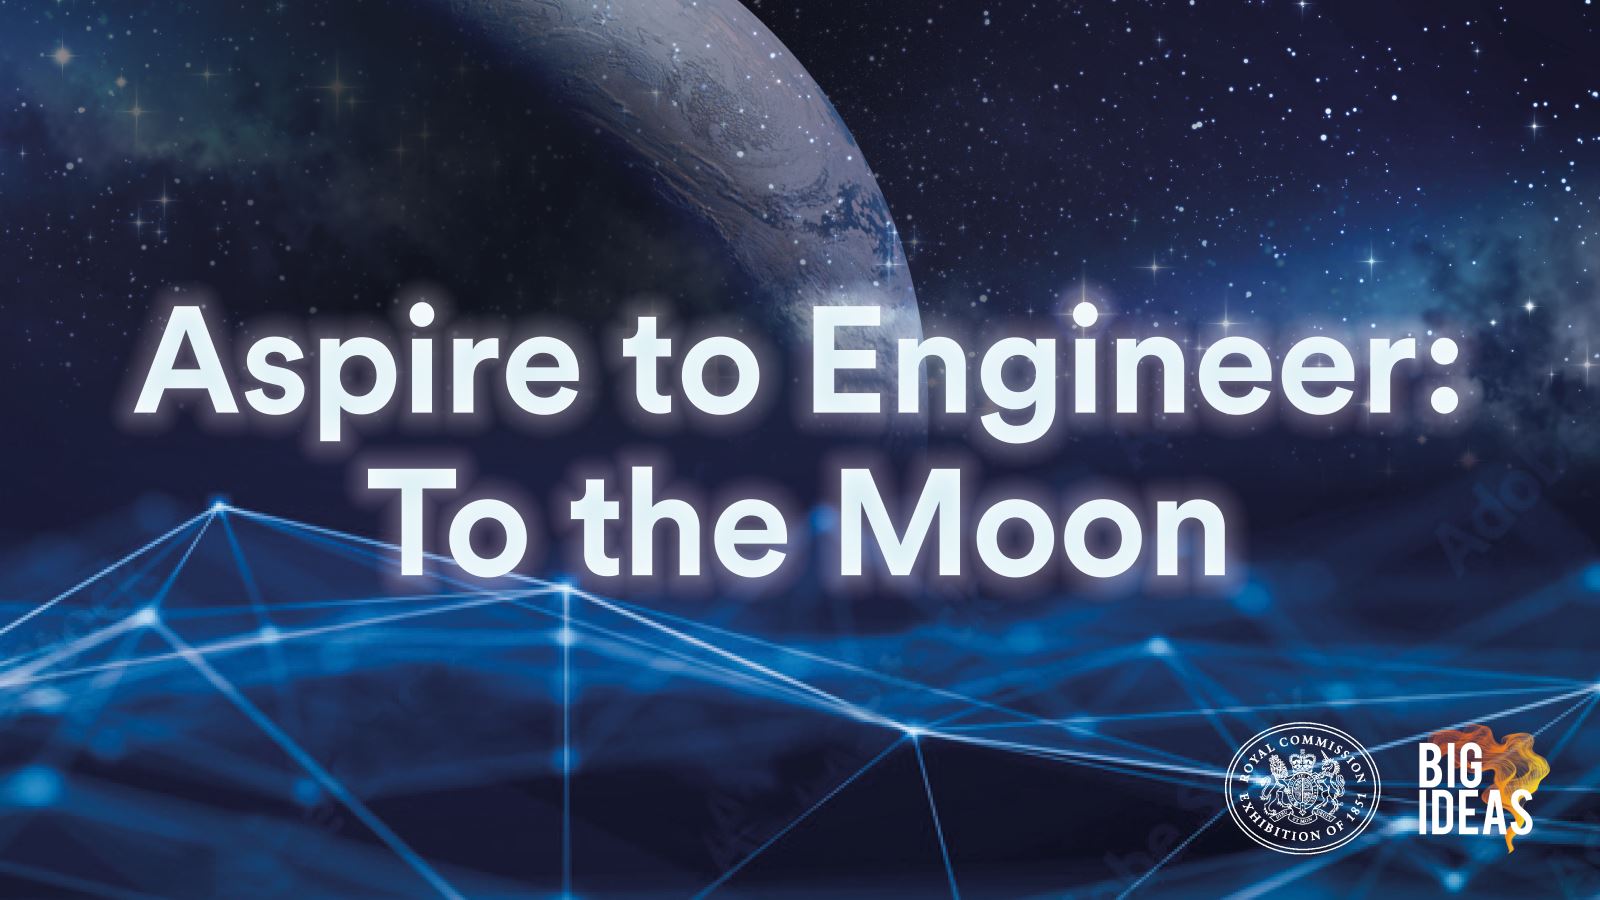 Aspire to Engineer to the Moon image